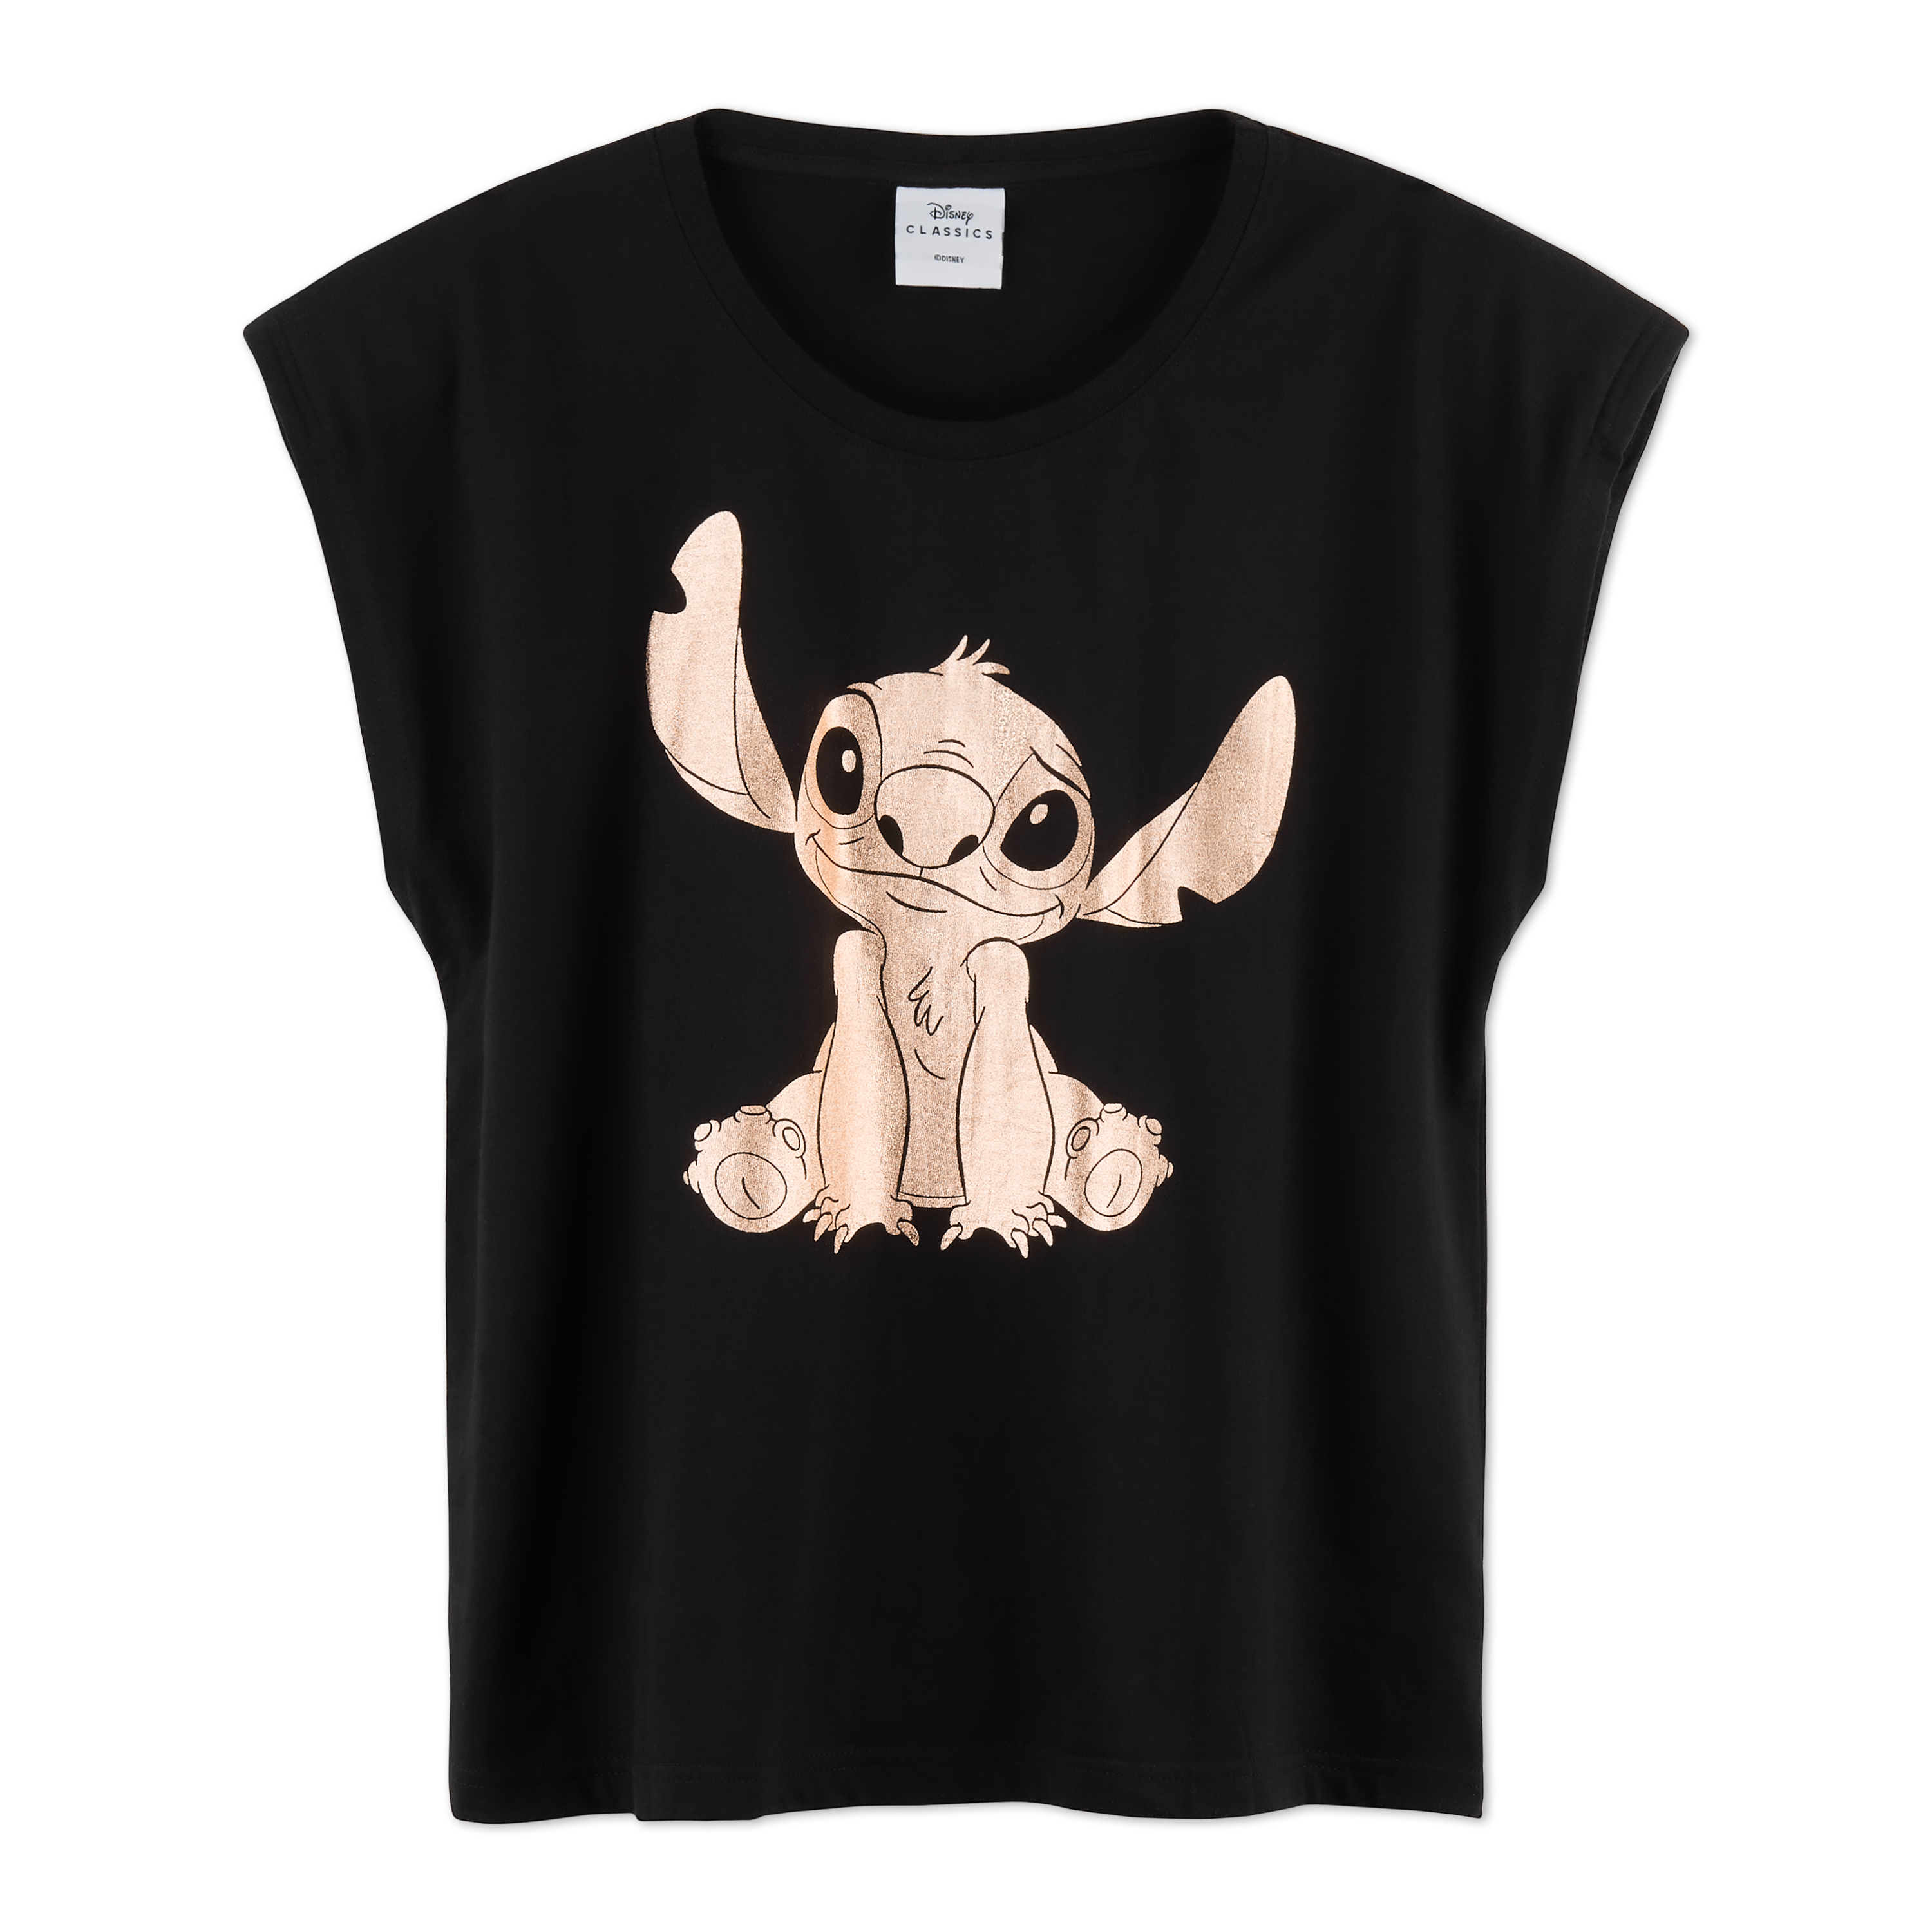 Disney T Shirts for Women Ladies Summer Tops Stitch Gifts